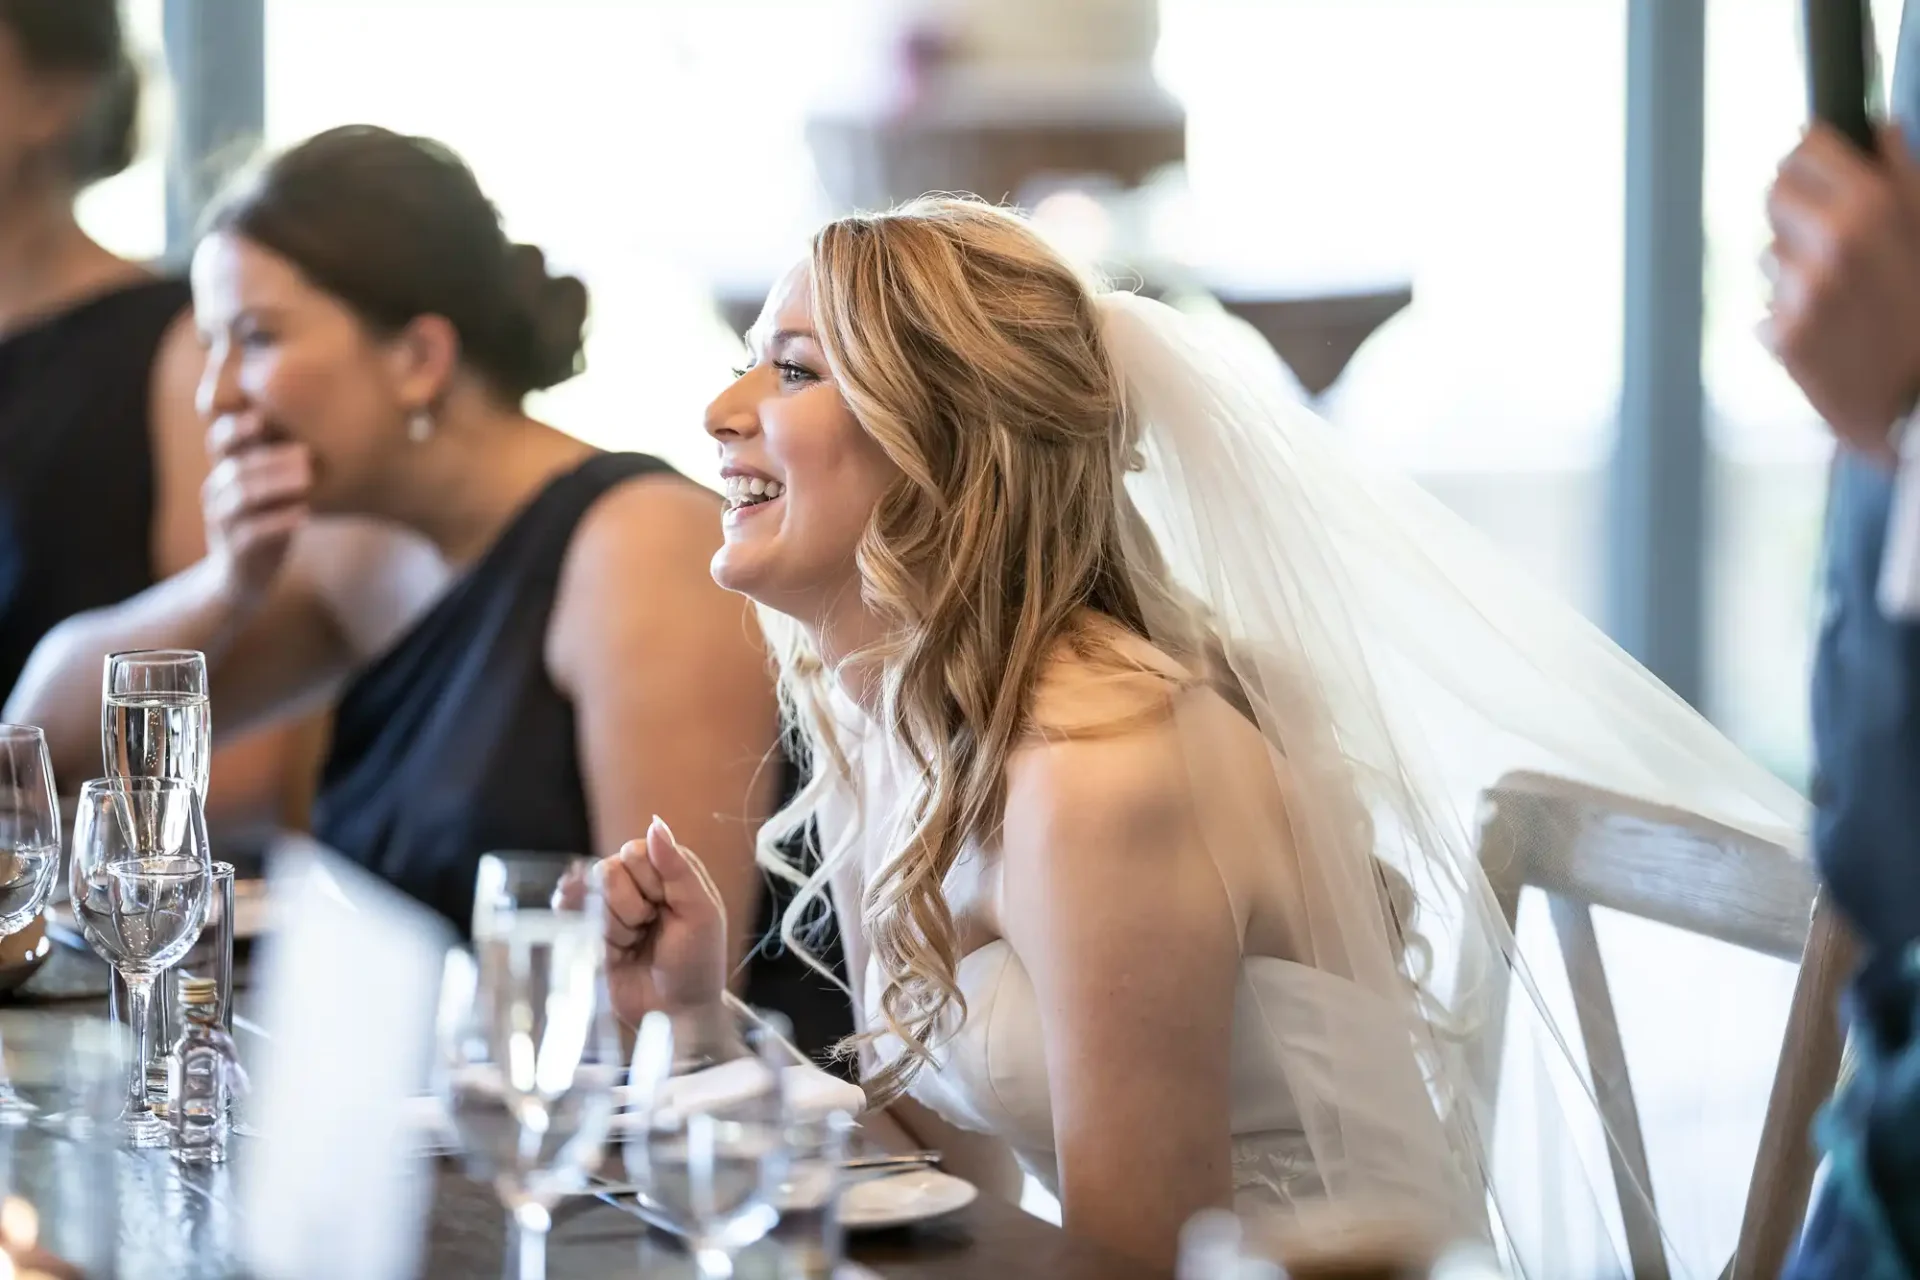 A bride in a white dress with a veil laughs joyfully at a table during a wedding reception, surrounded by guests.